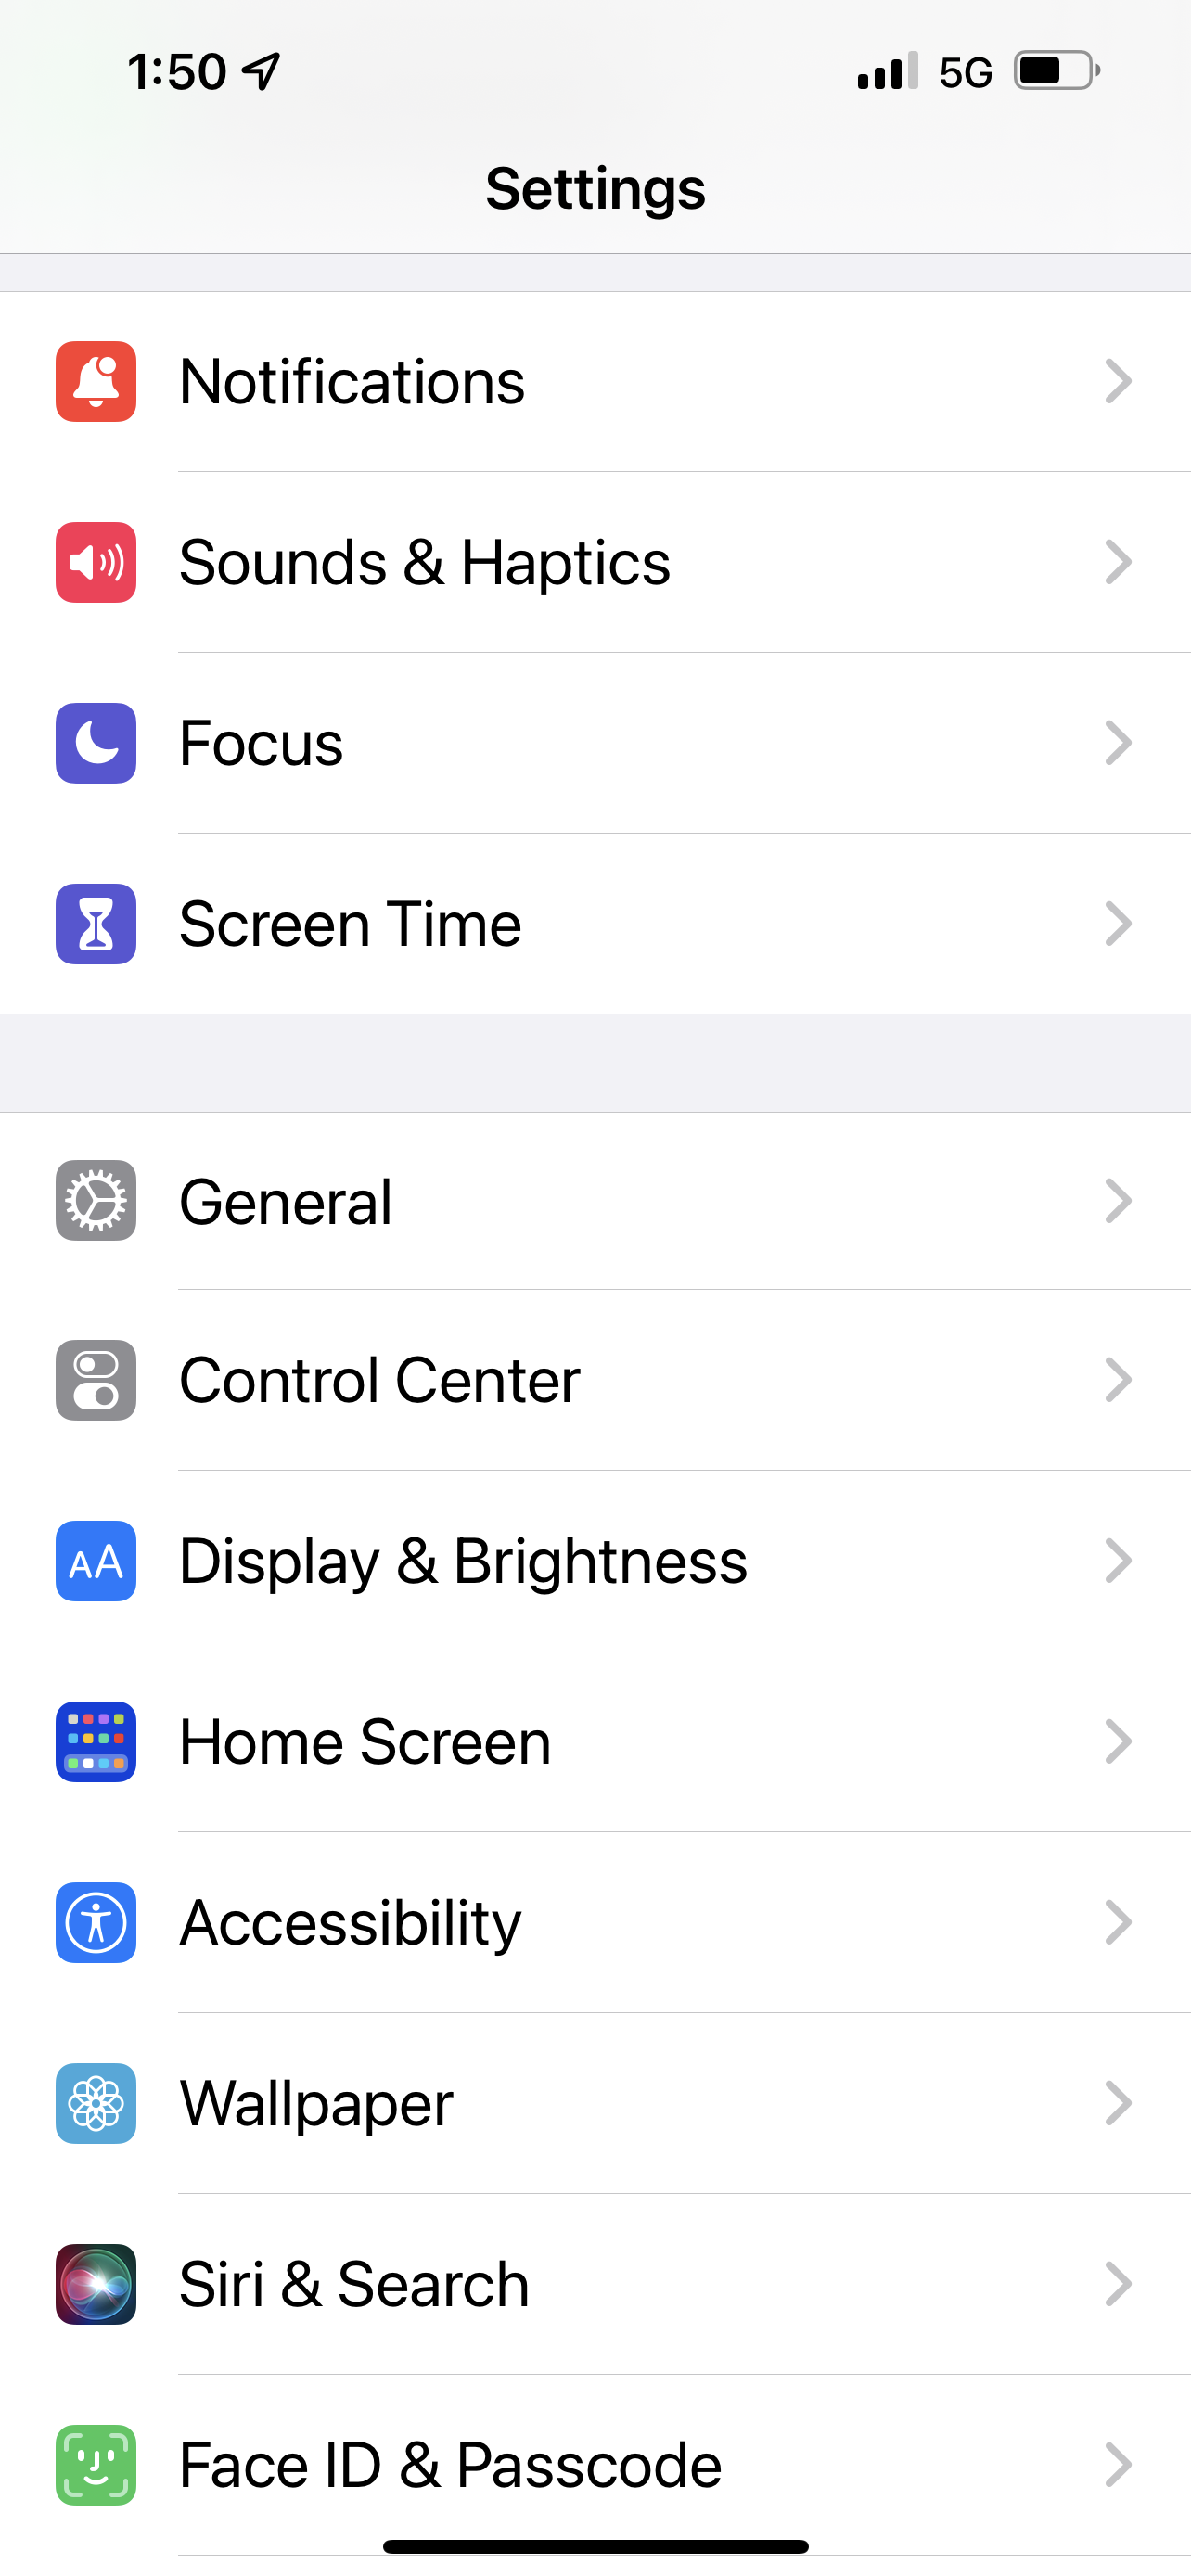 iPhone 13 Pro Max Settings Display Features